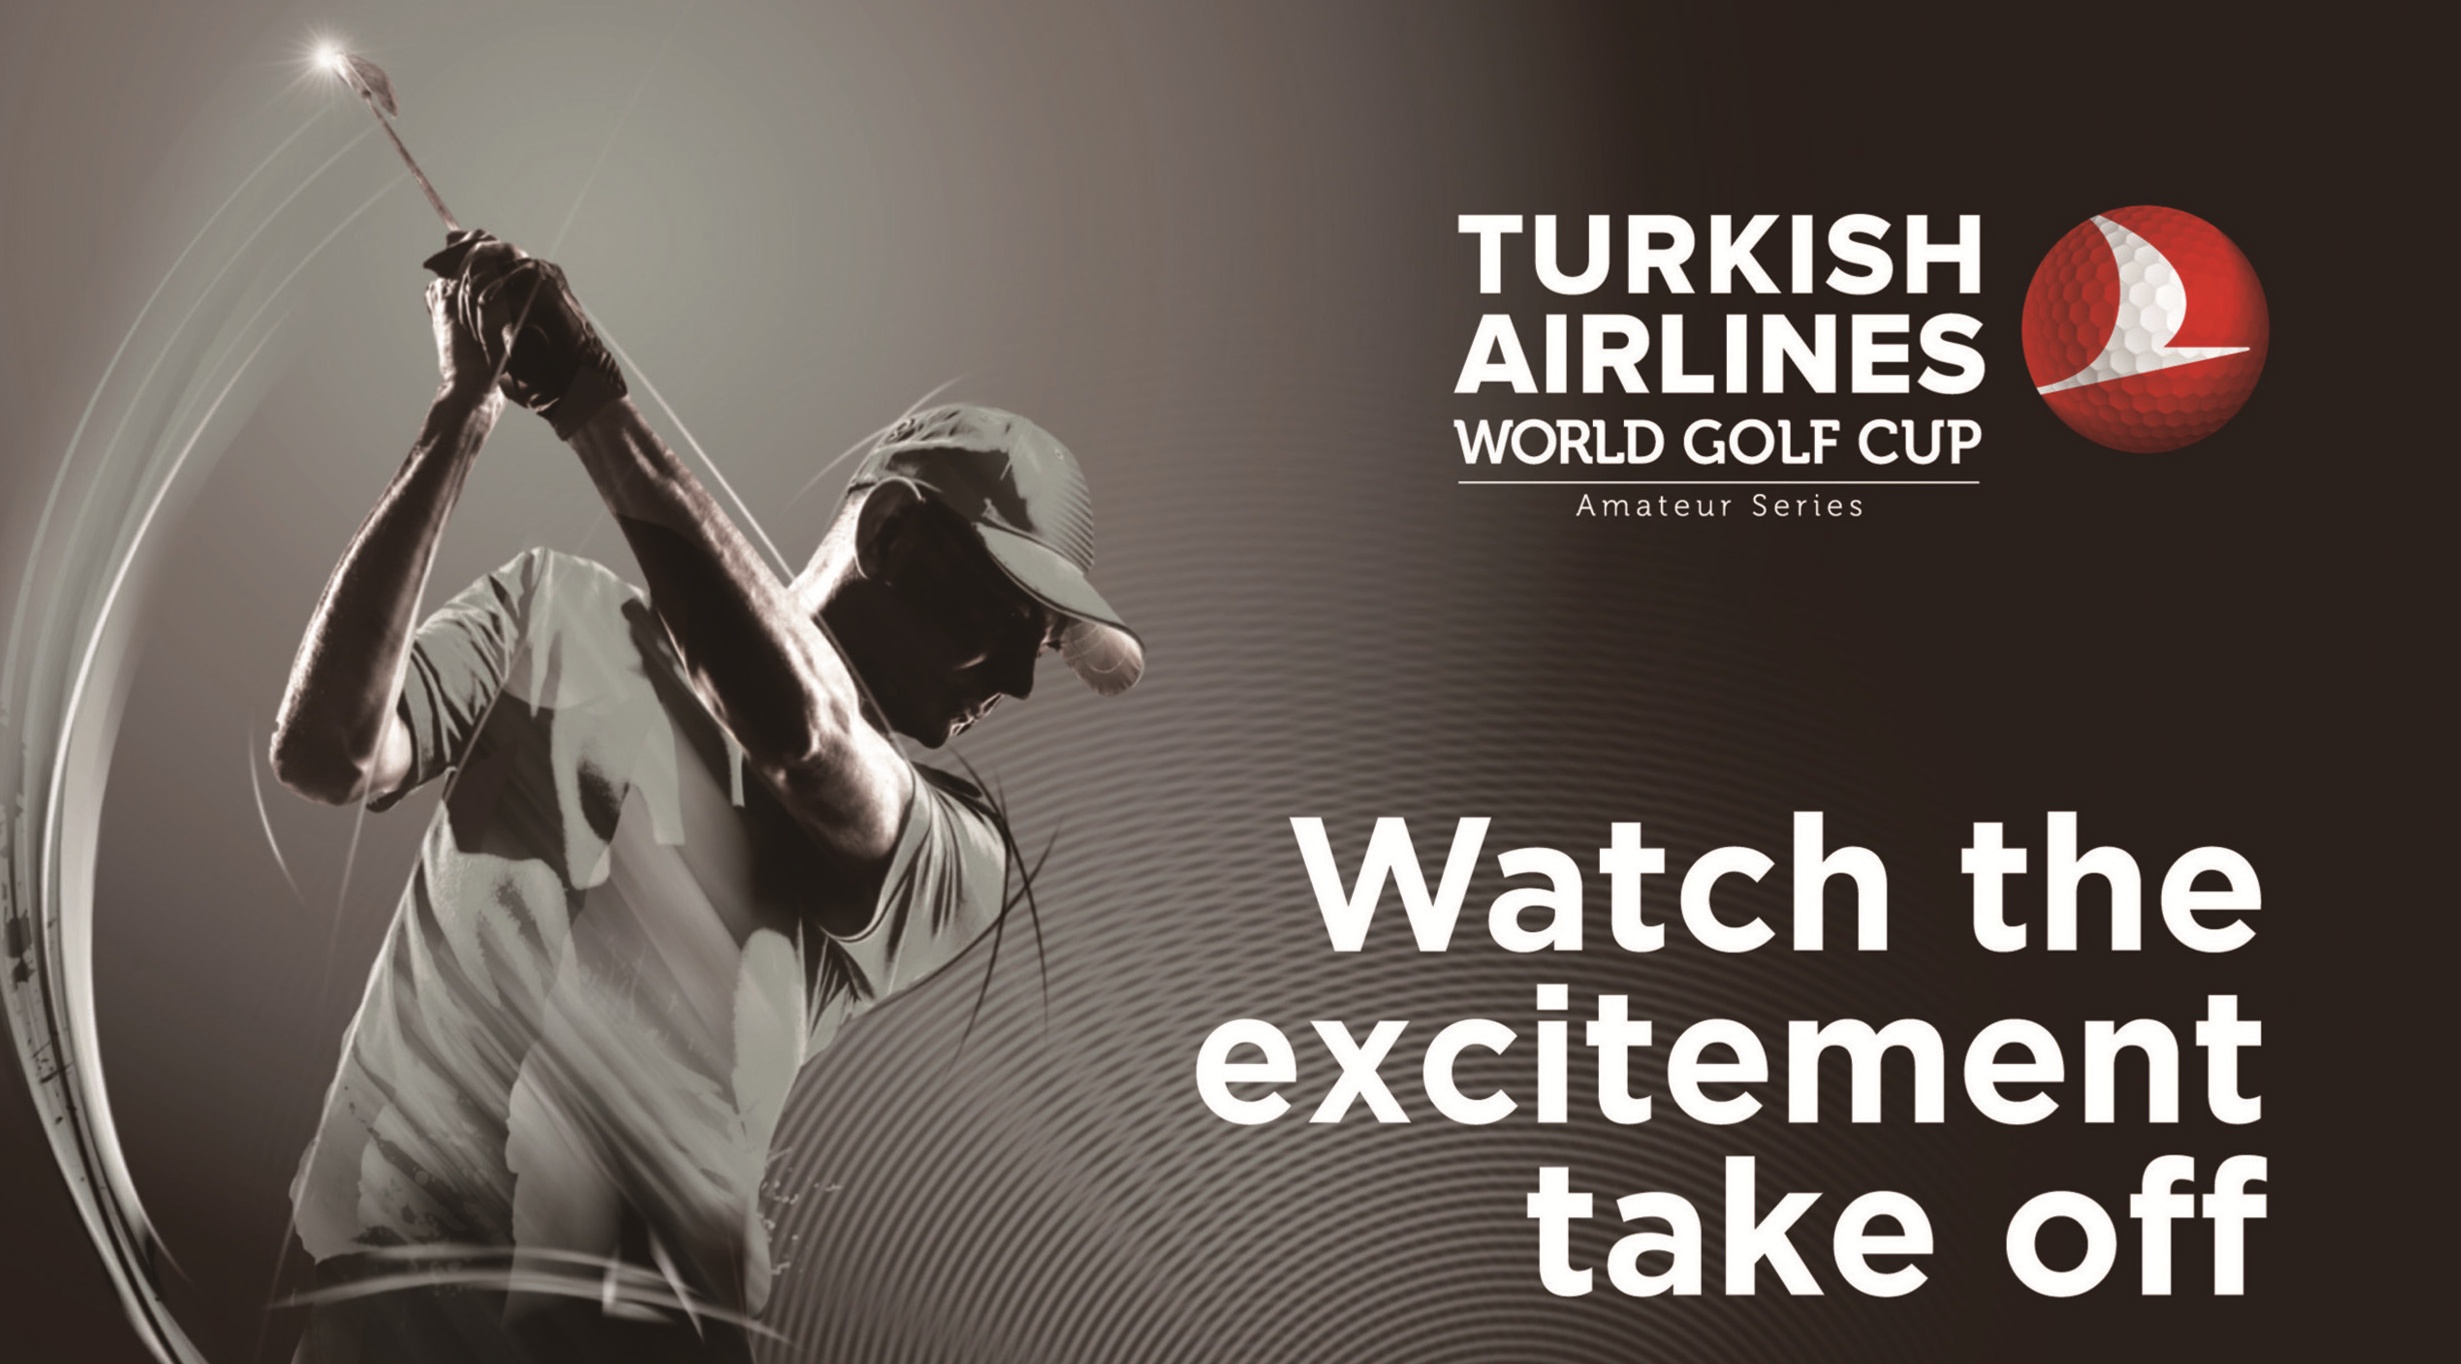 Turkish Airlines World Golf Cup 2015